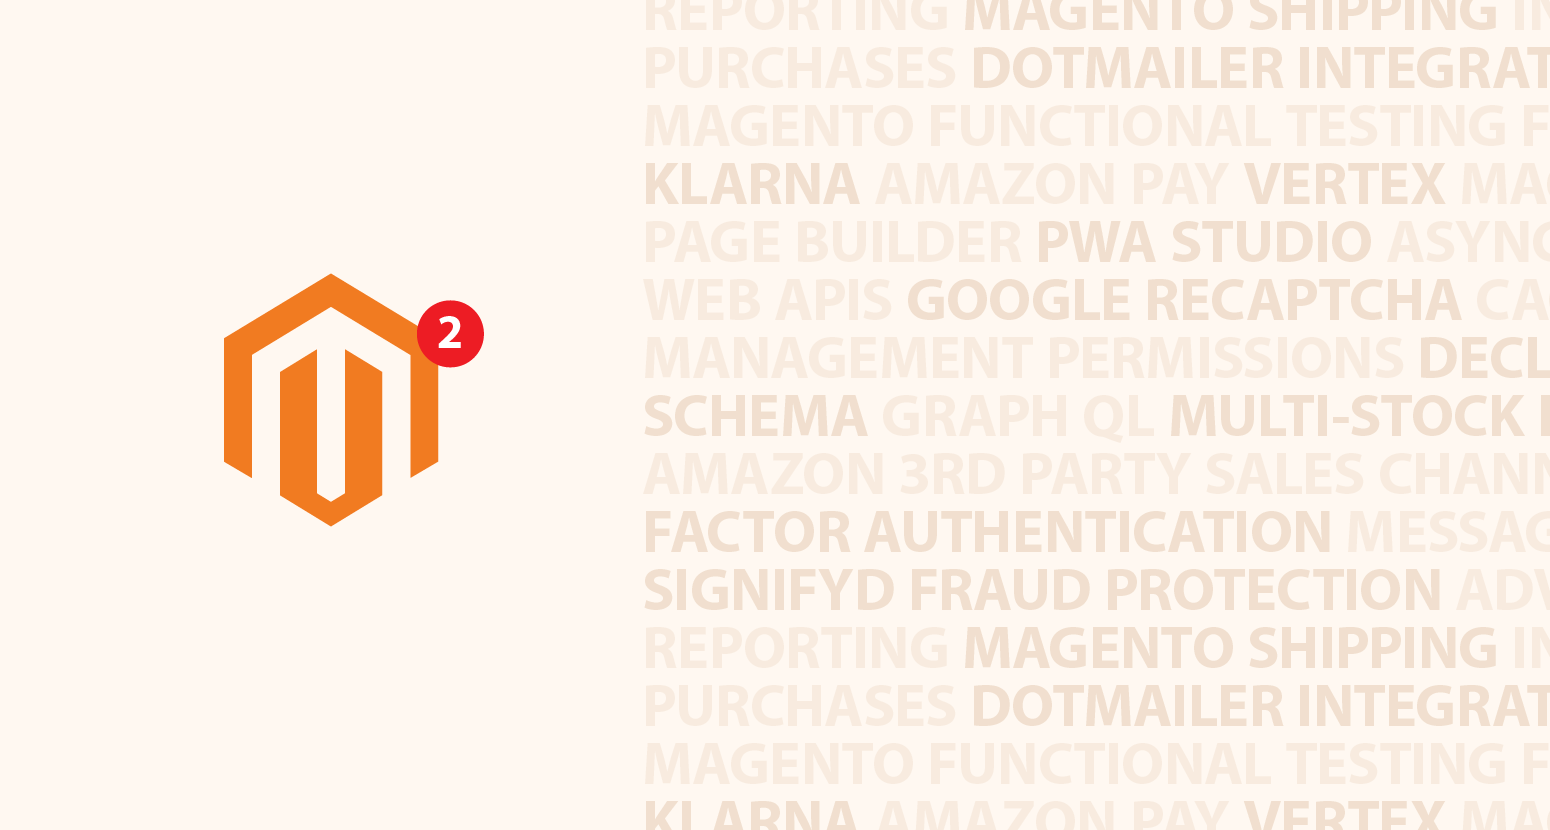 Latest Releases in Magento 2